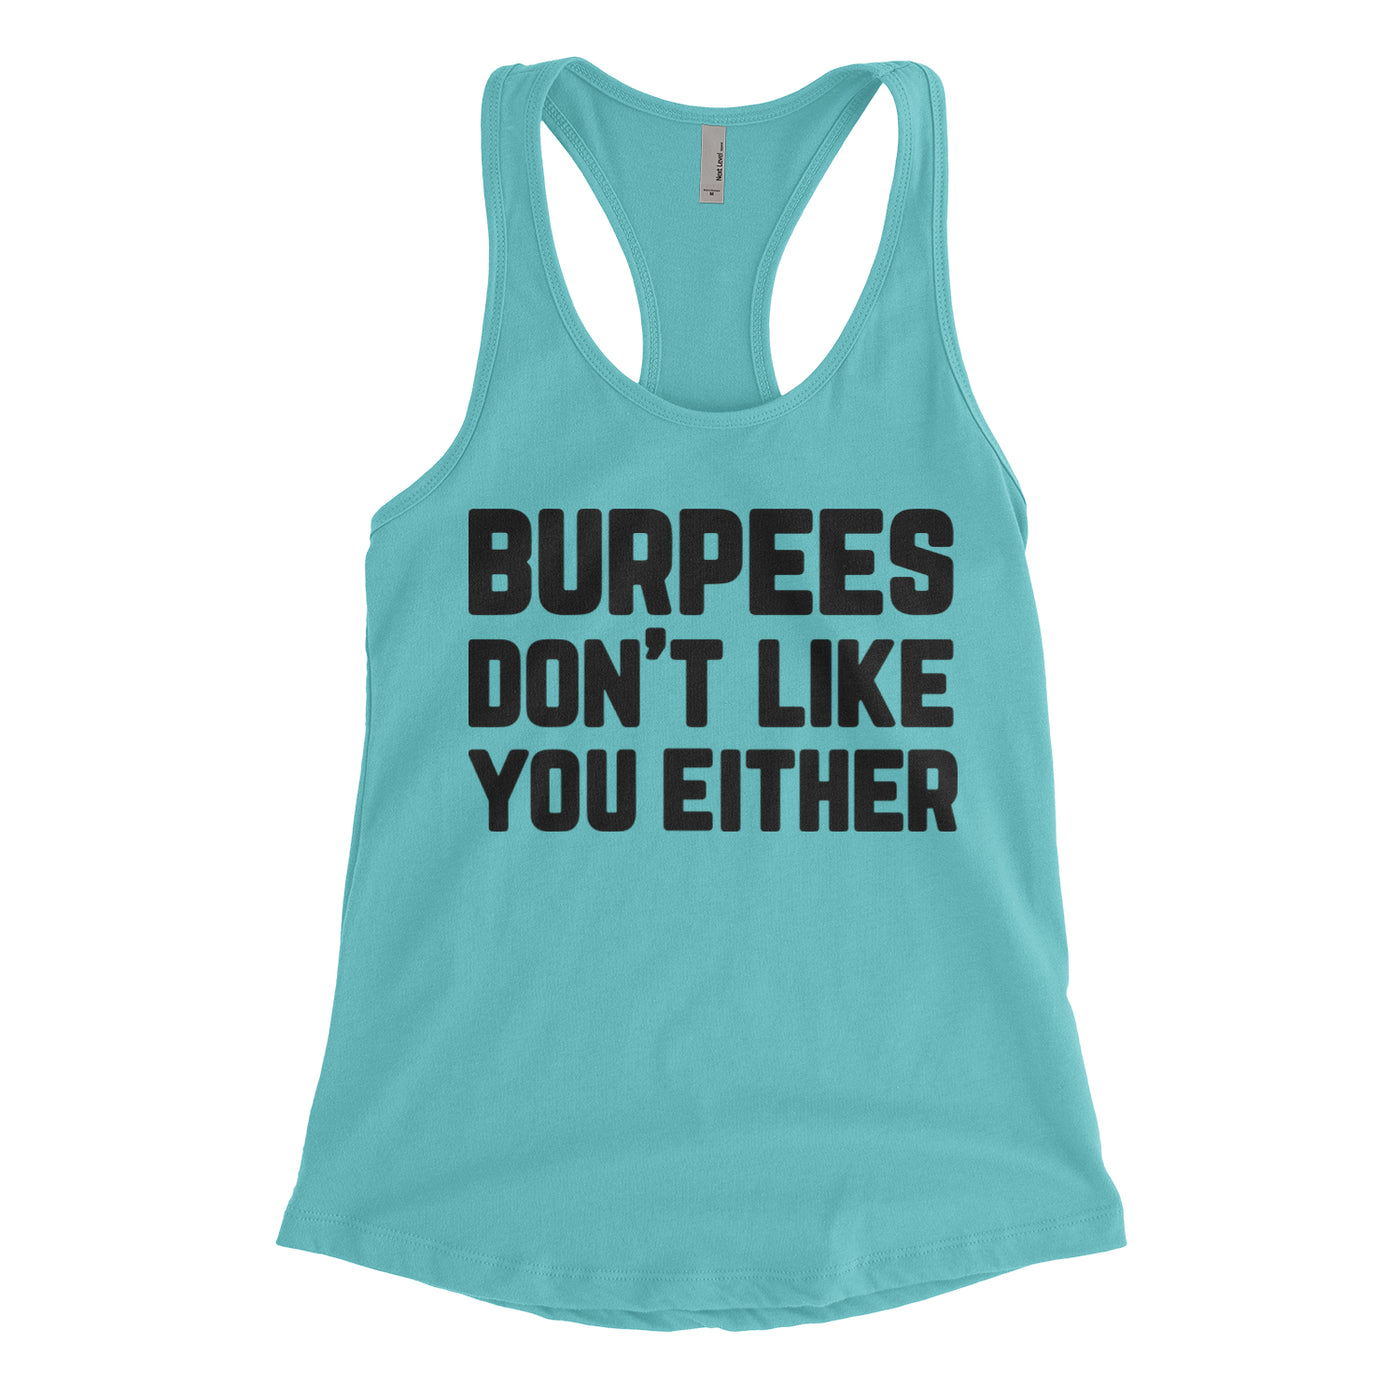 Burpees Don't Like You Blacked Out